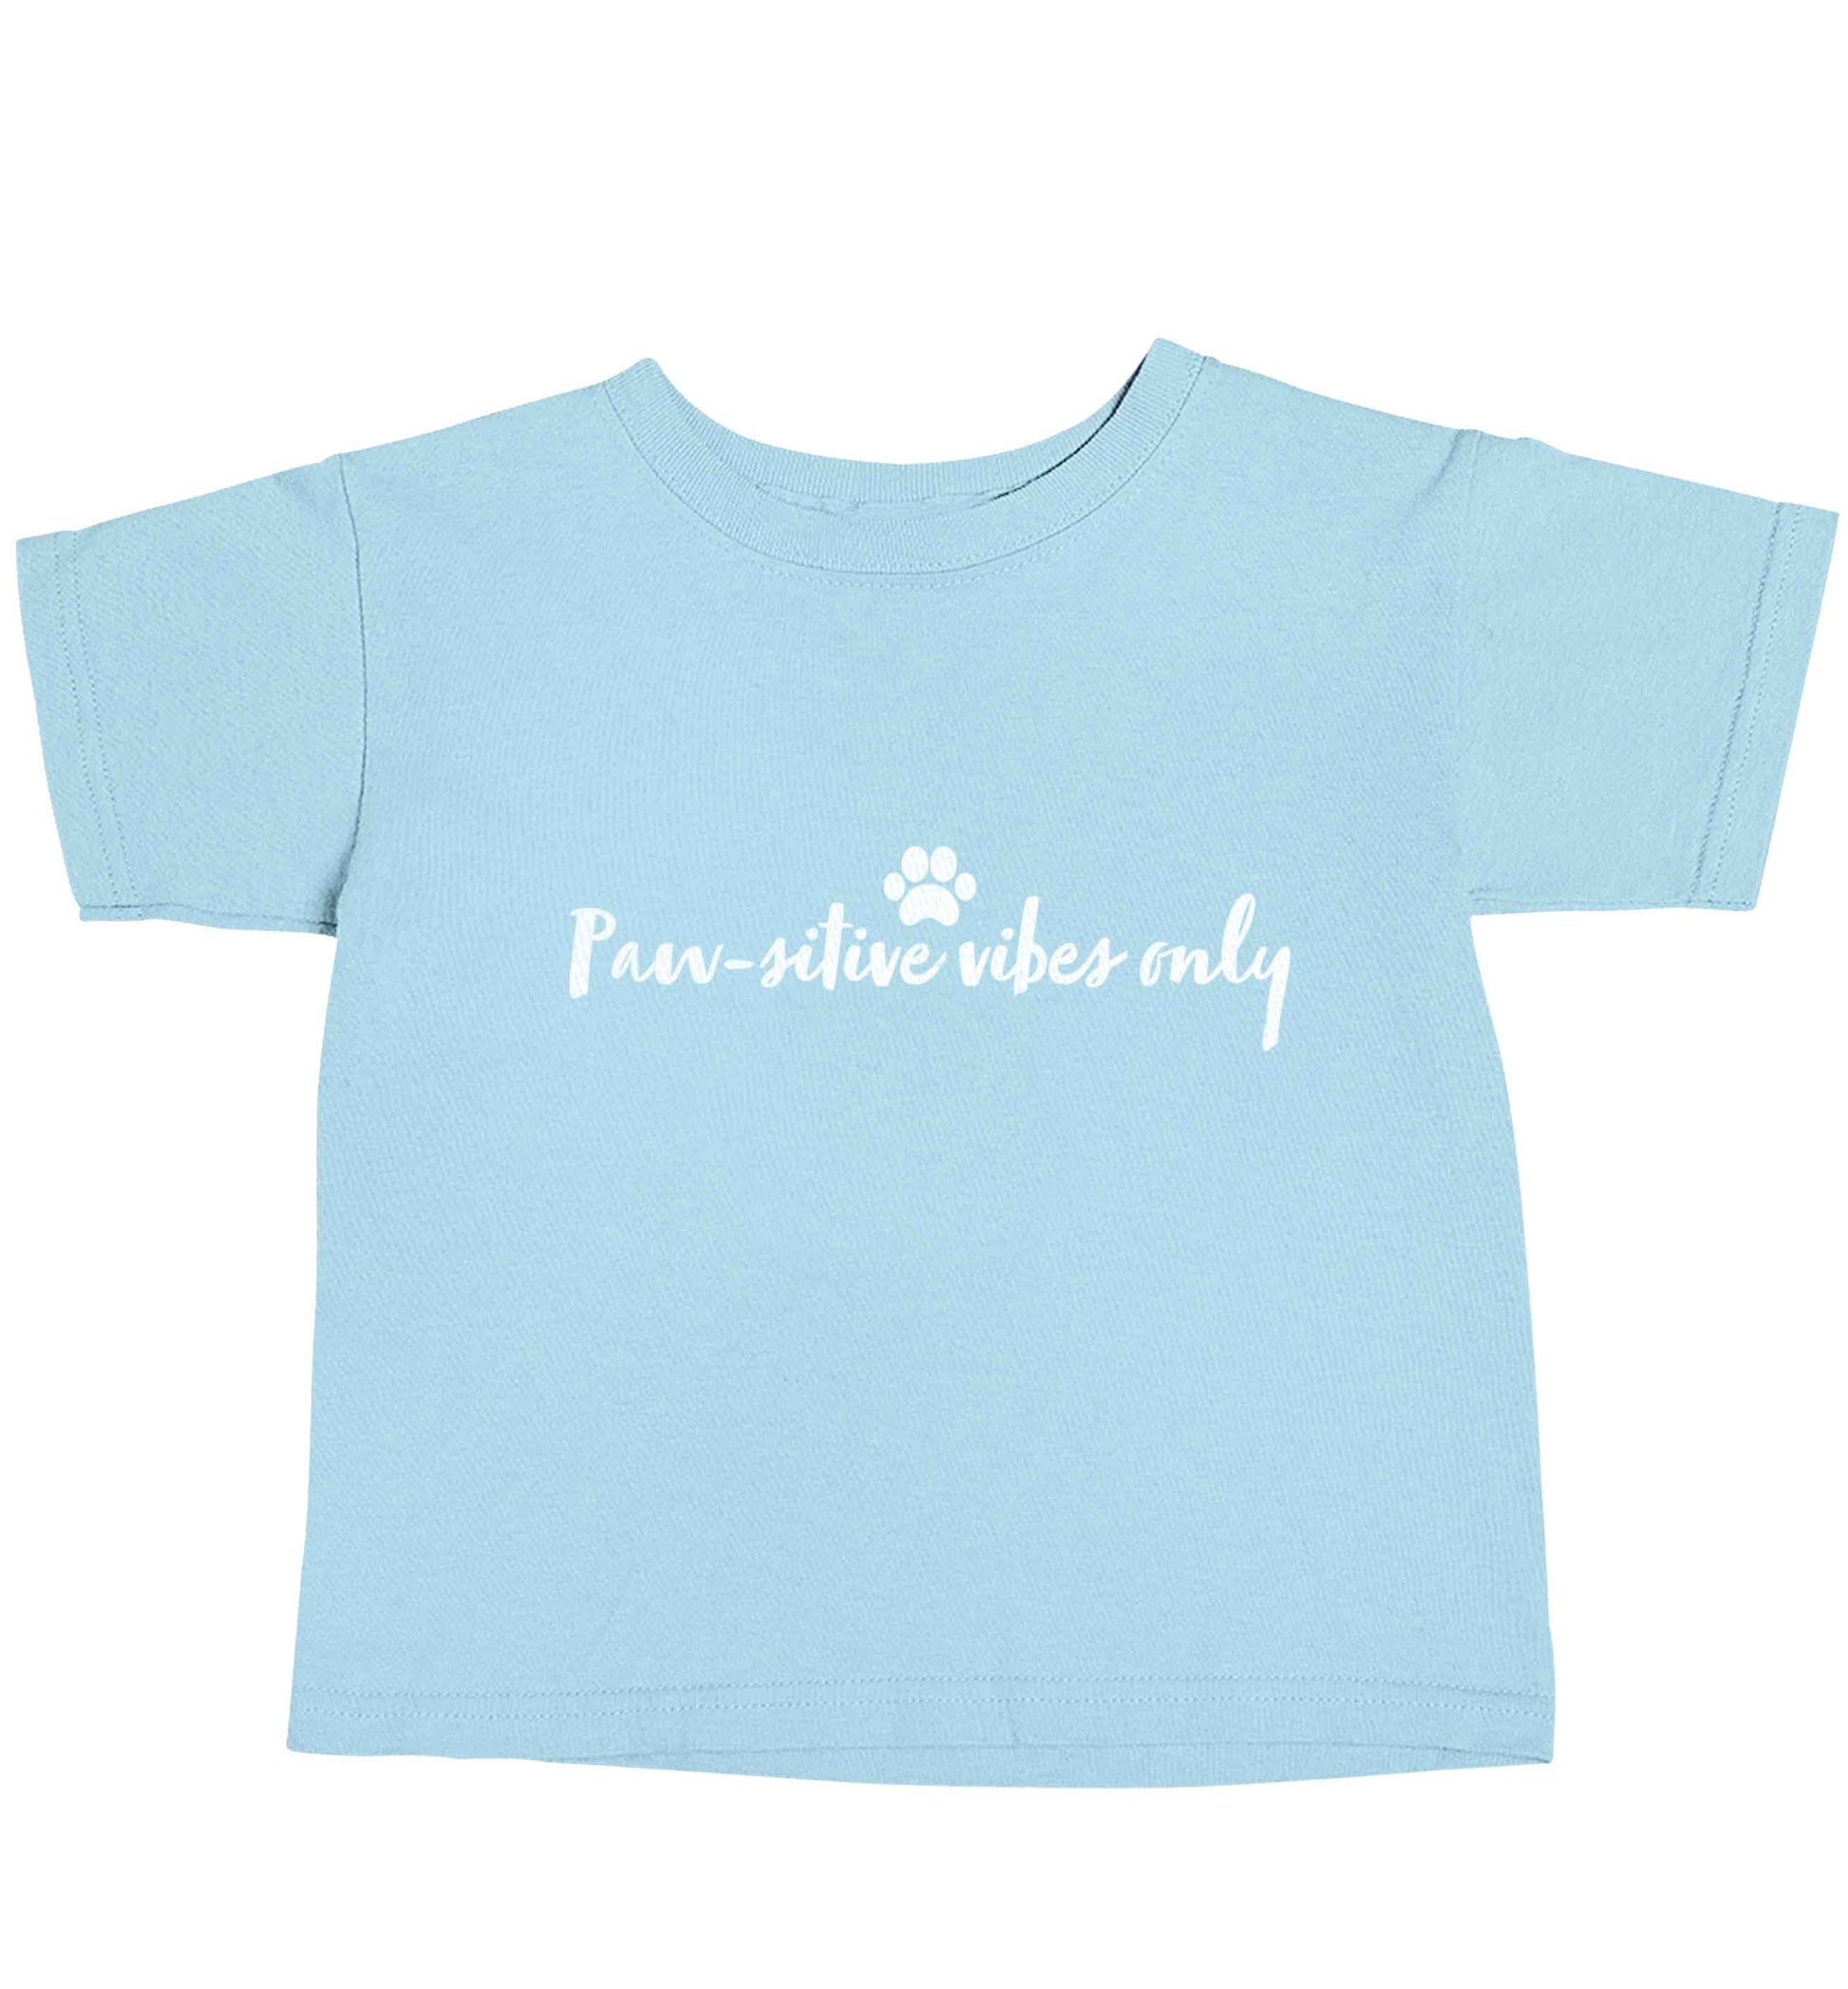 Pawsitive vibes only Kit light blue baby toddler Tshirt 2 Years